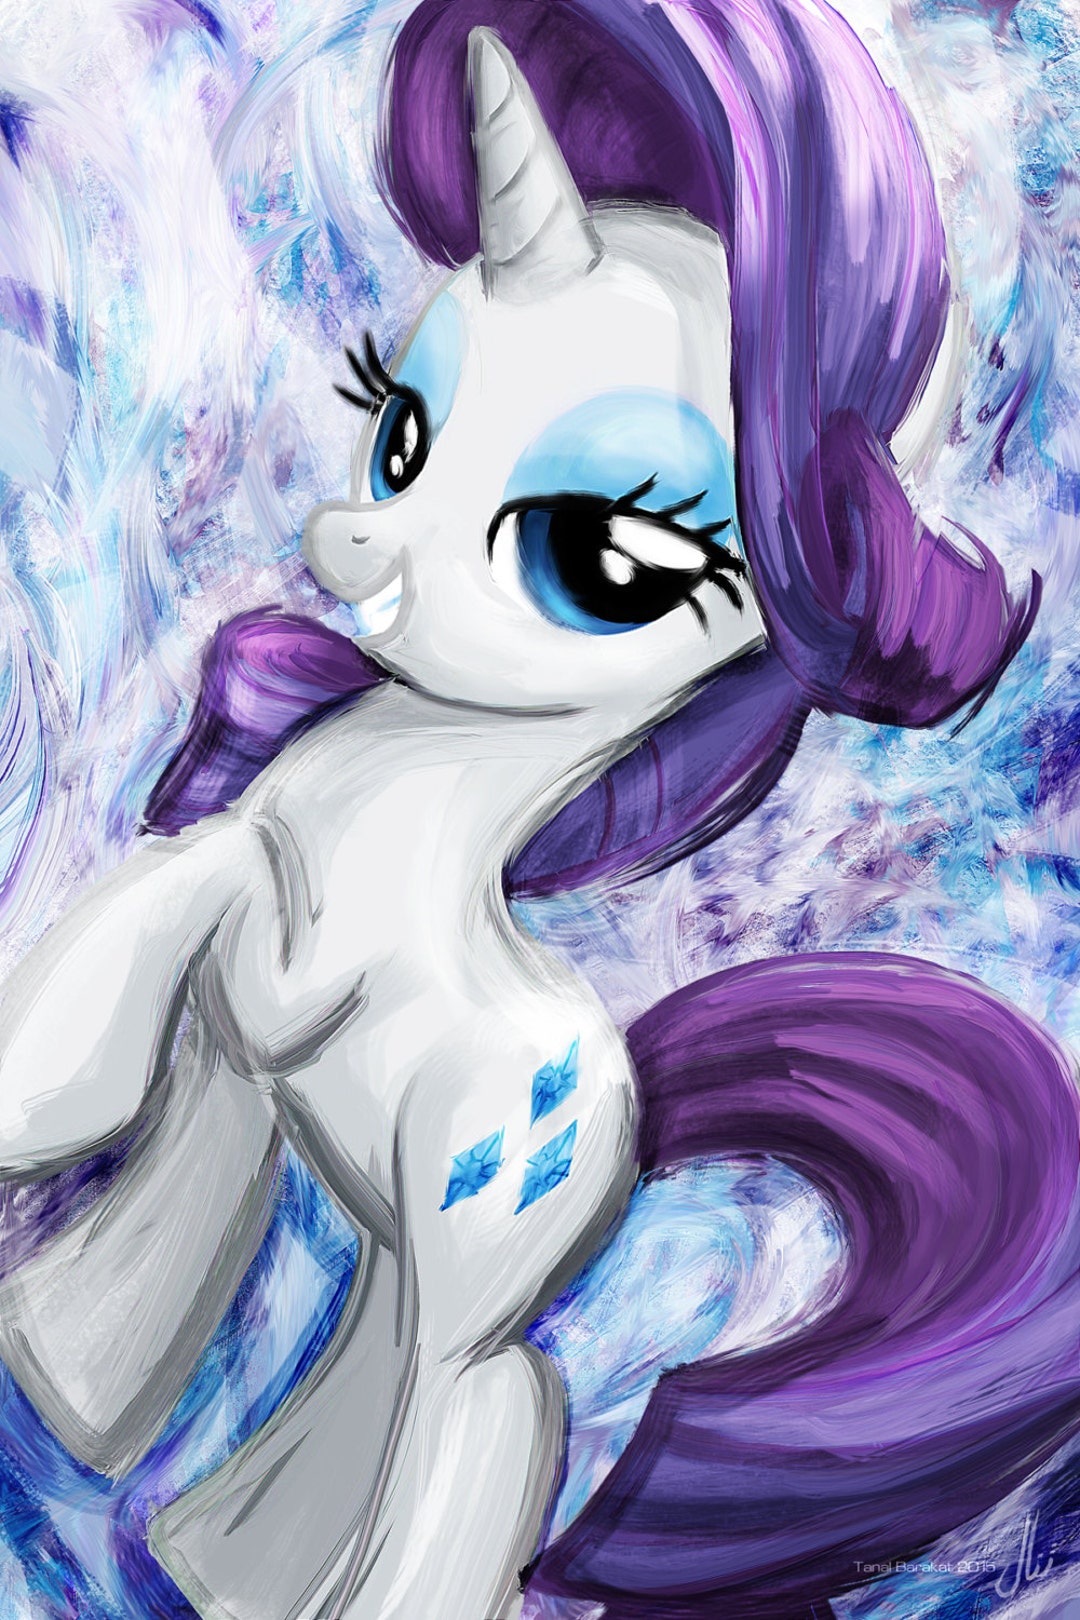 My little pony names, My little pony poster, My little pony drawing